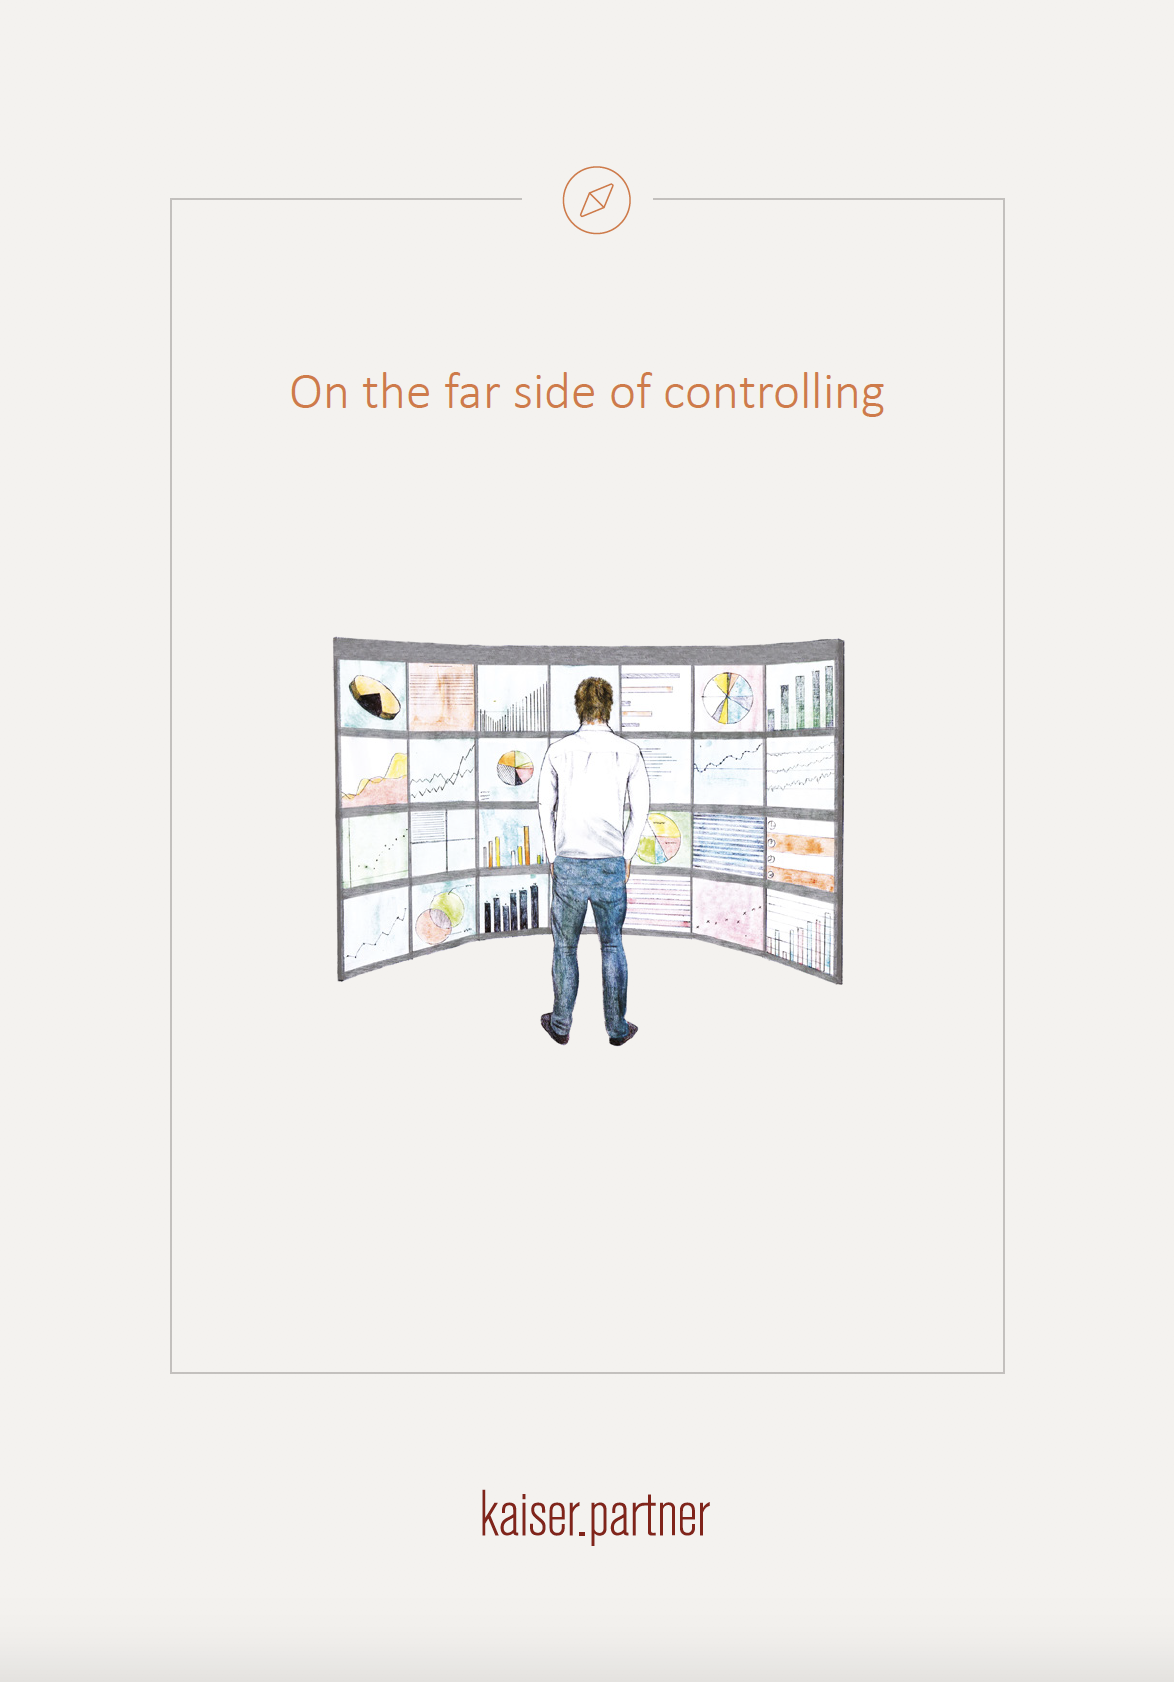 On the far side of controlling